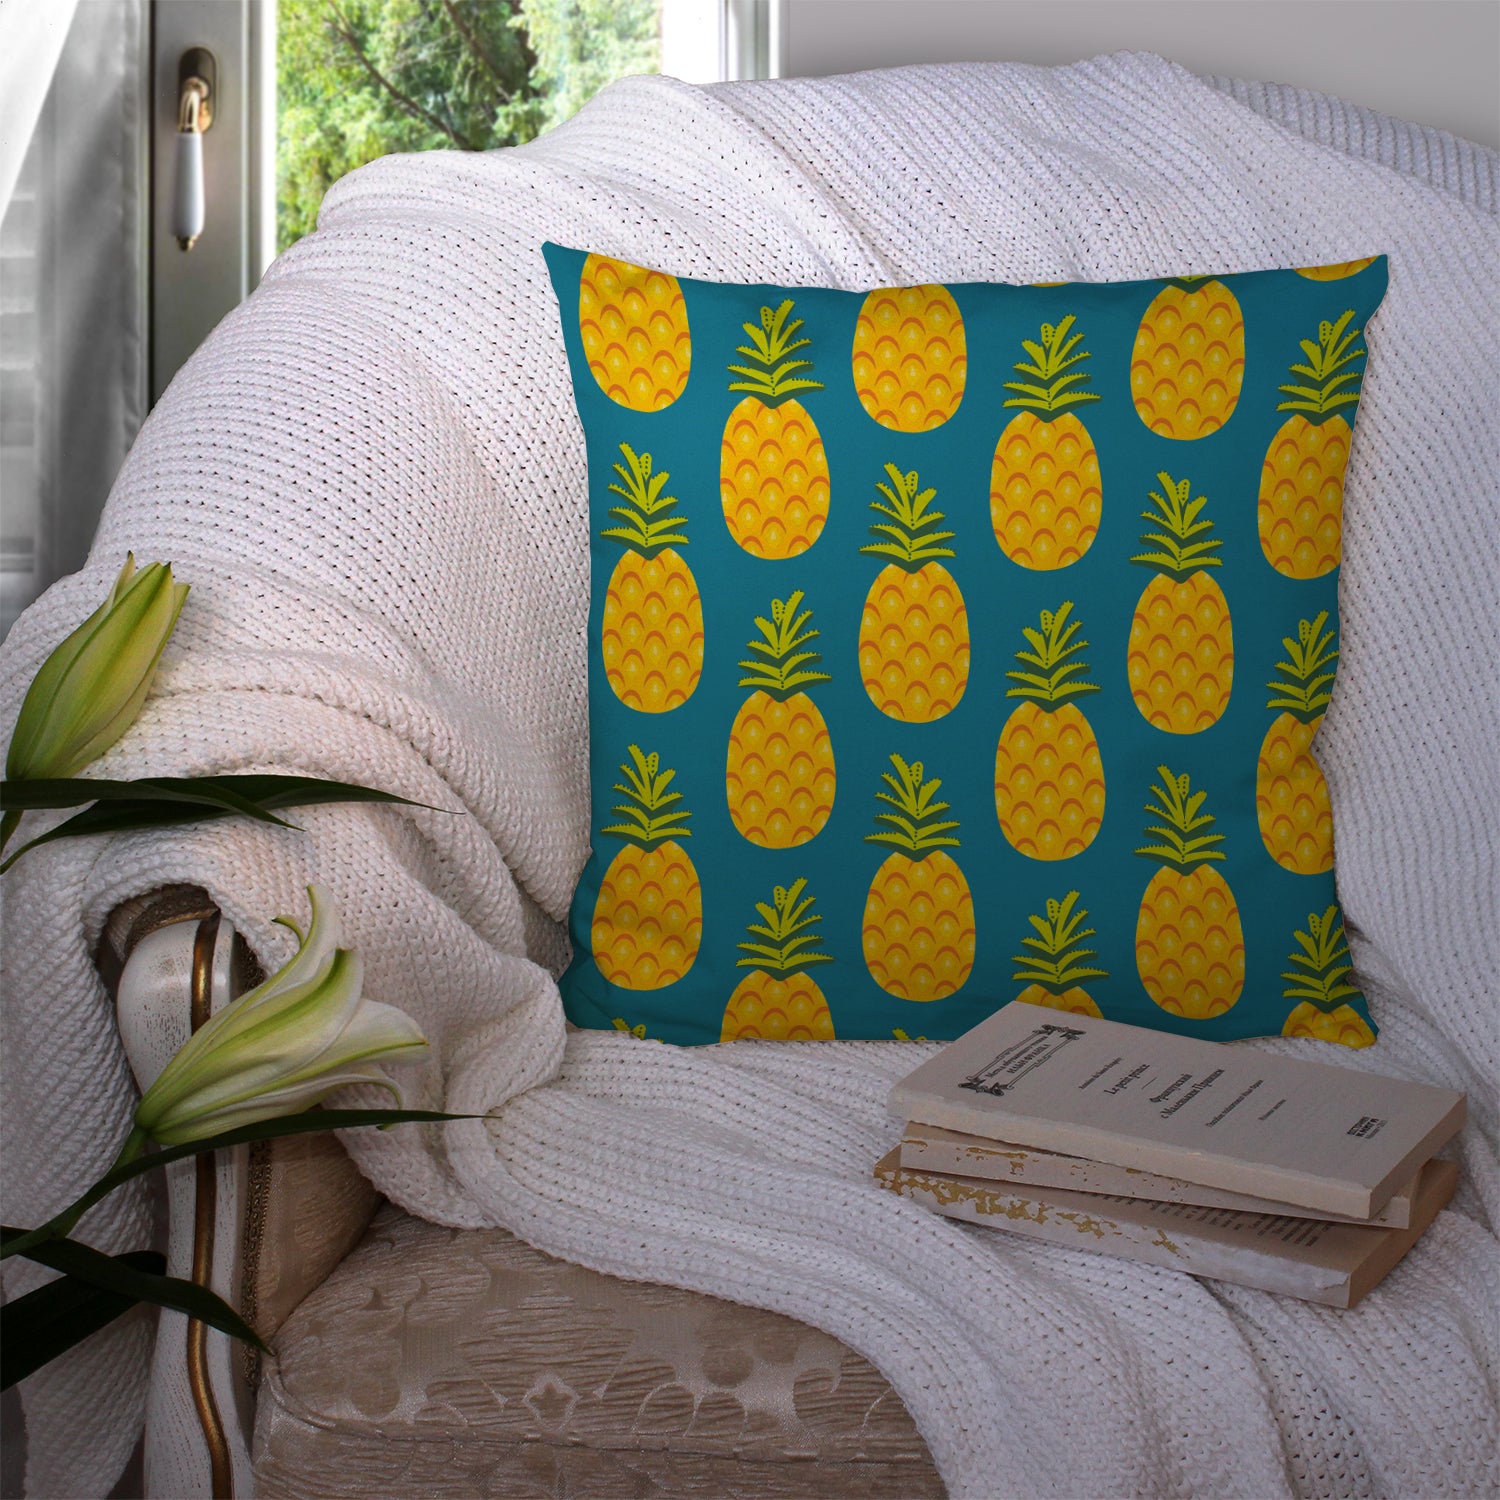 Pineapples on Teal Fabric Decorative Pillow BB5145PW1414 - the-store.com